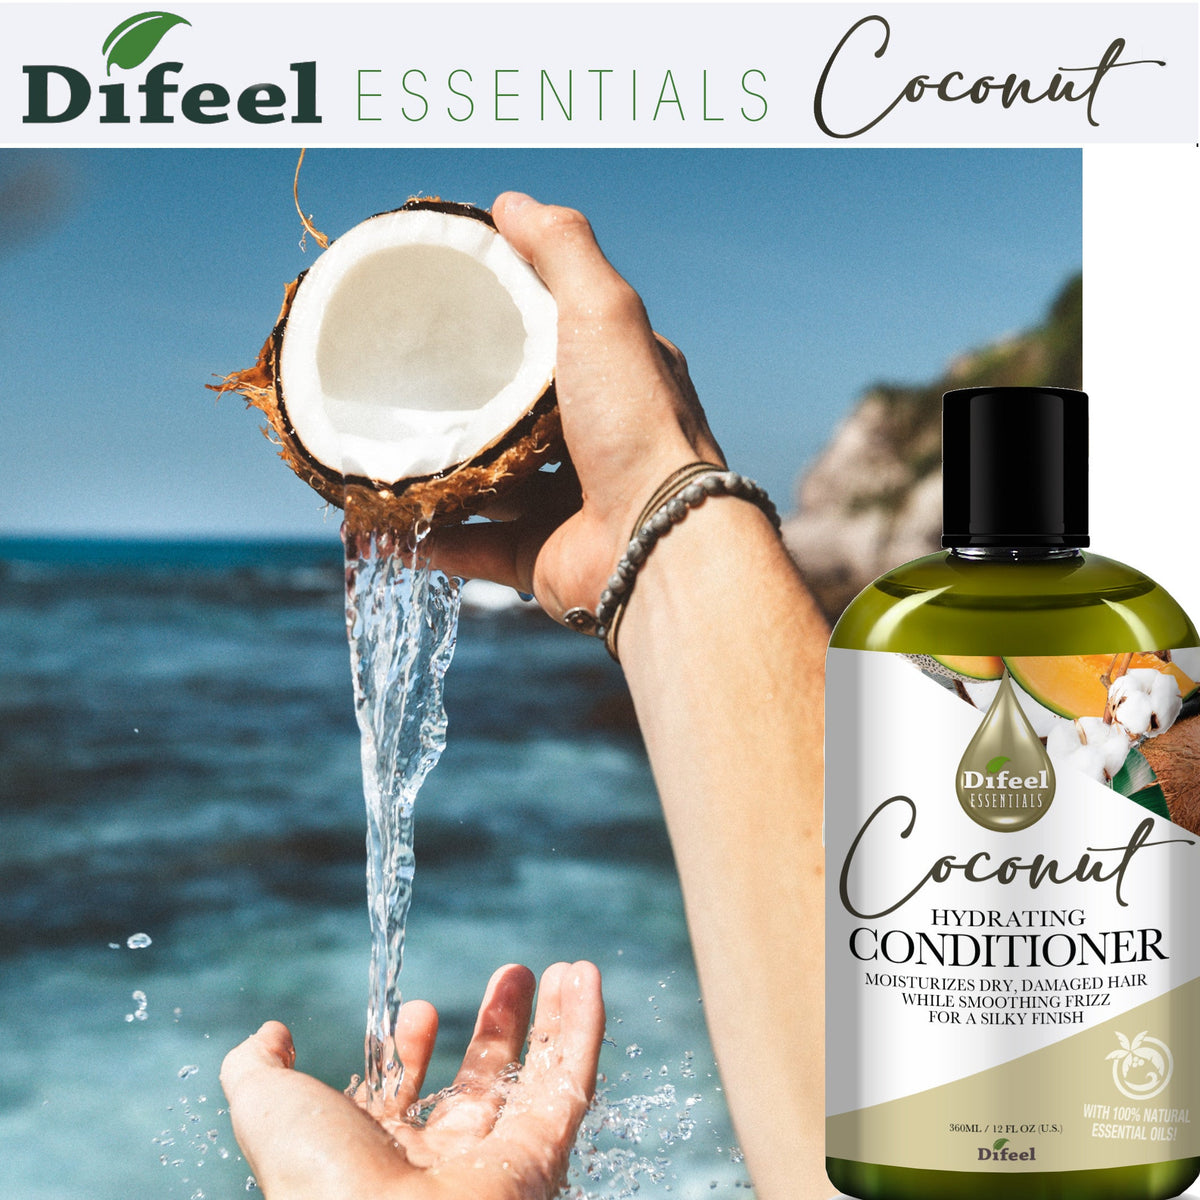 Difeel Essentials Hydrating Coconut - Conditioner 12 oz. by difeel - find your natural beauty